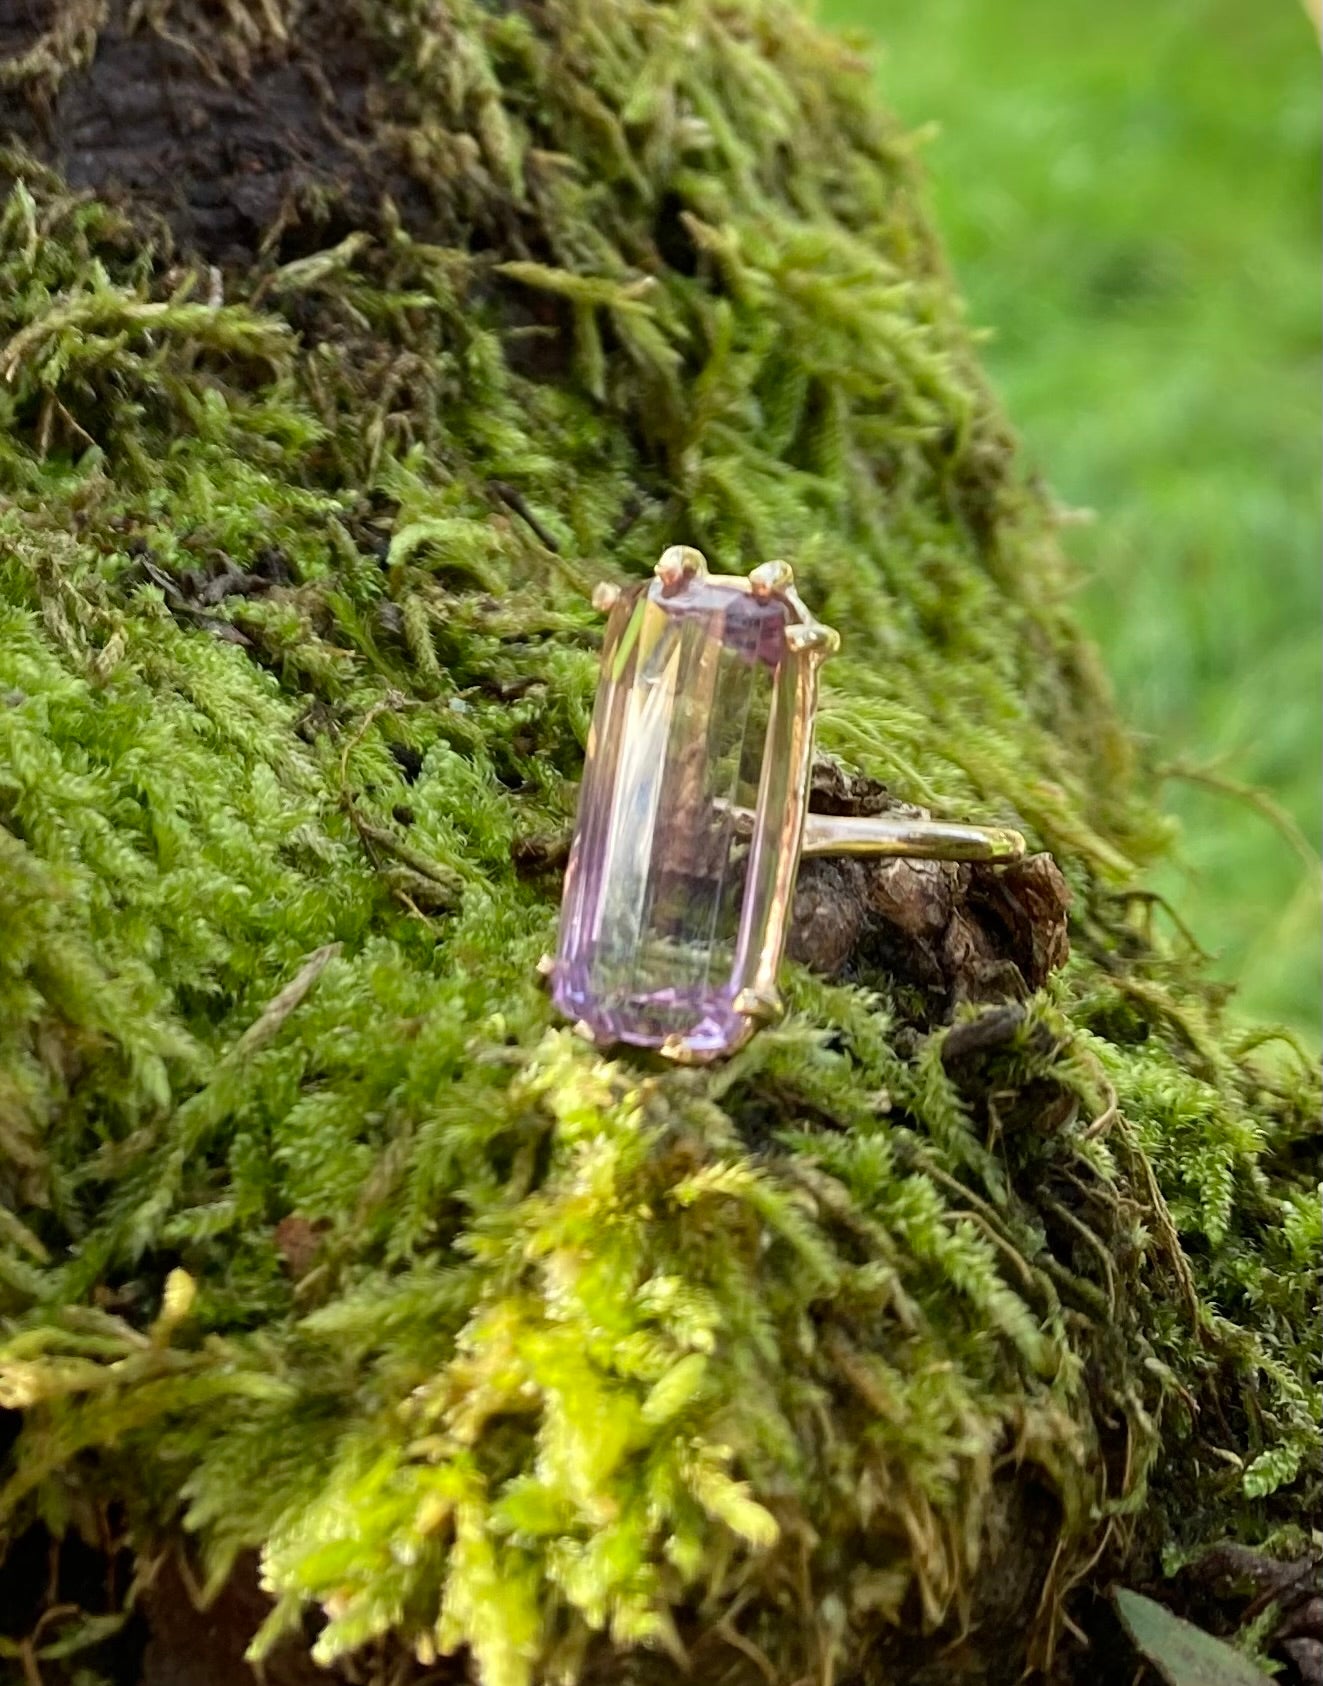 oblong ametrine yellow and purple gemstone gold ring in moss